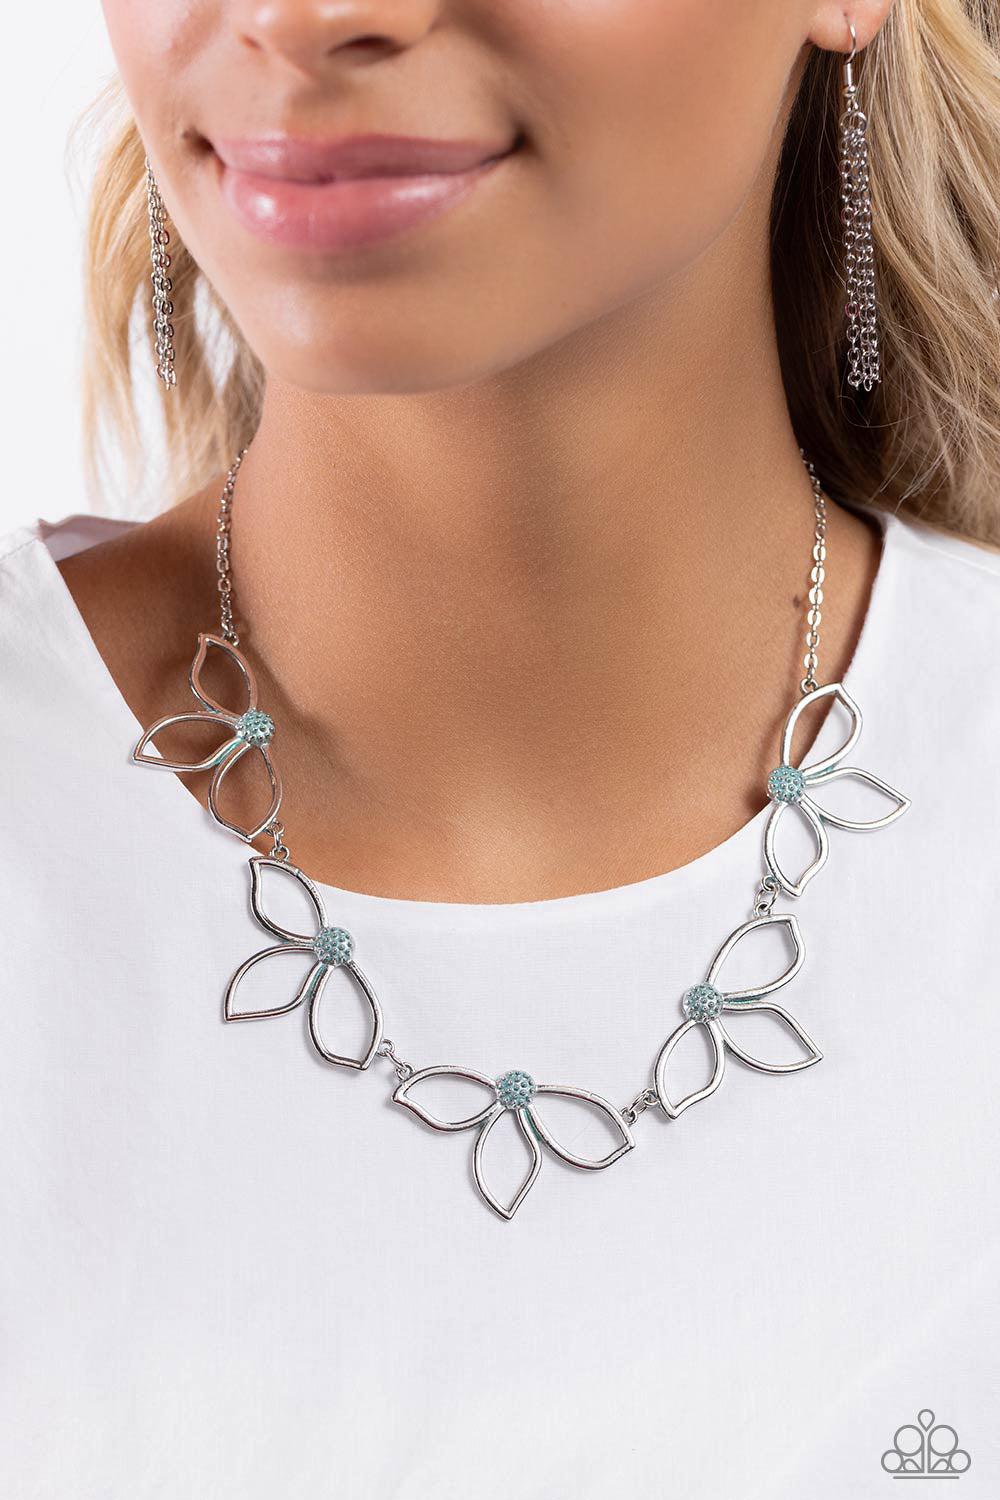 Petal Pageantry Blue & Silver Floral Necklace - Paparazzi Accessories- lightbox - CarasShop.com - $5 Jewelry by Cara Jewels